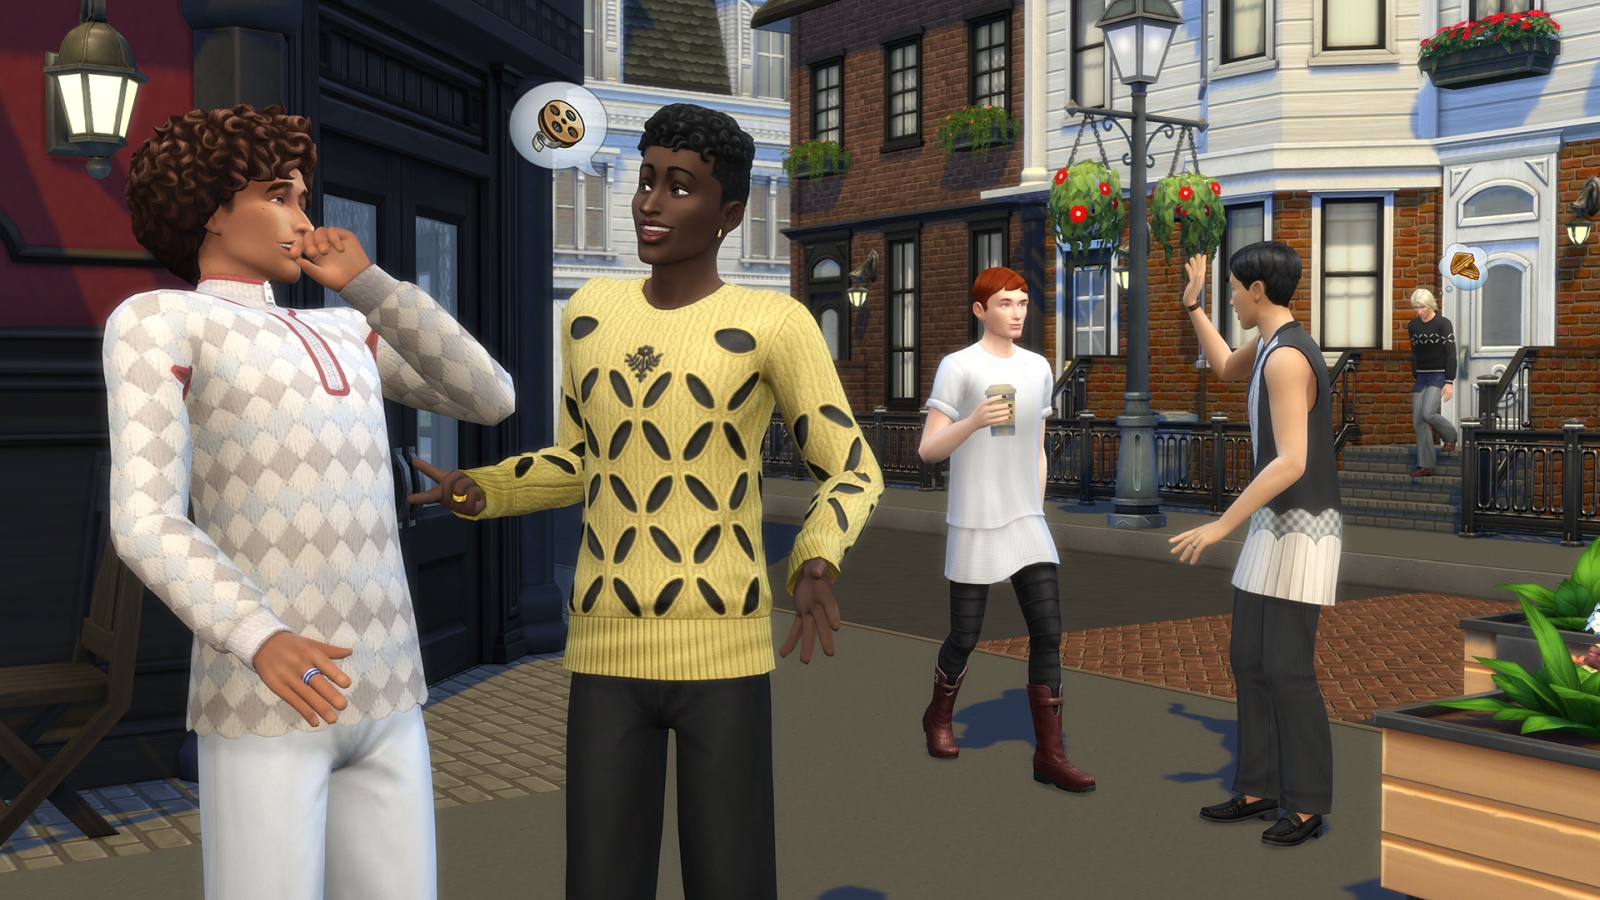 Sims 4 Modern Menswear Kit review - A after hits GAMINGTREND